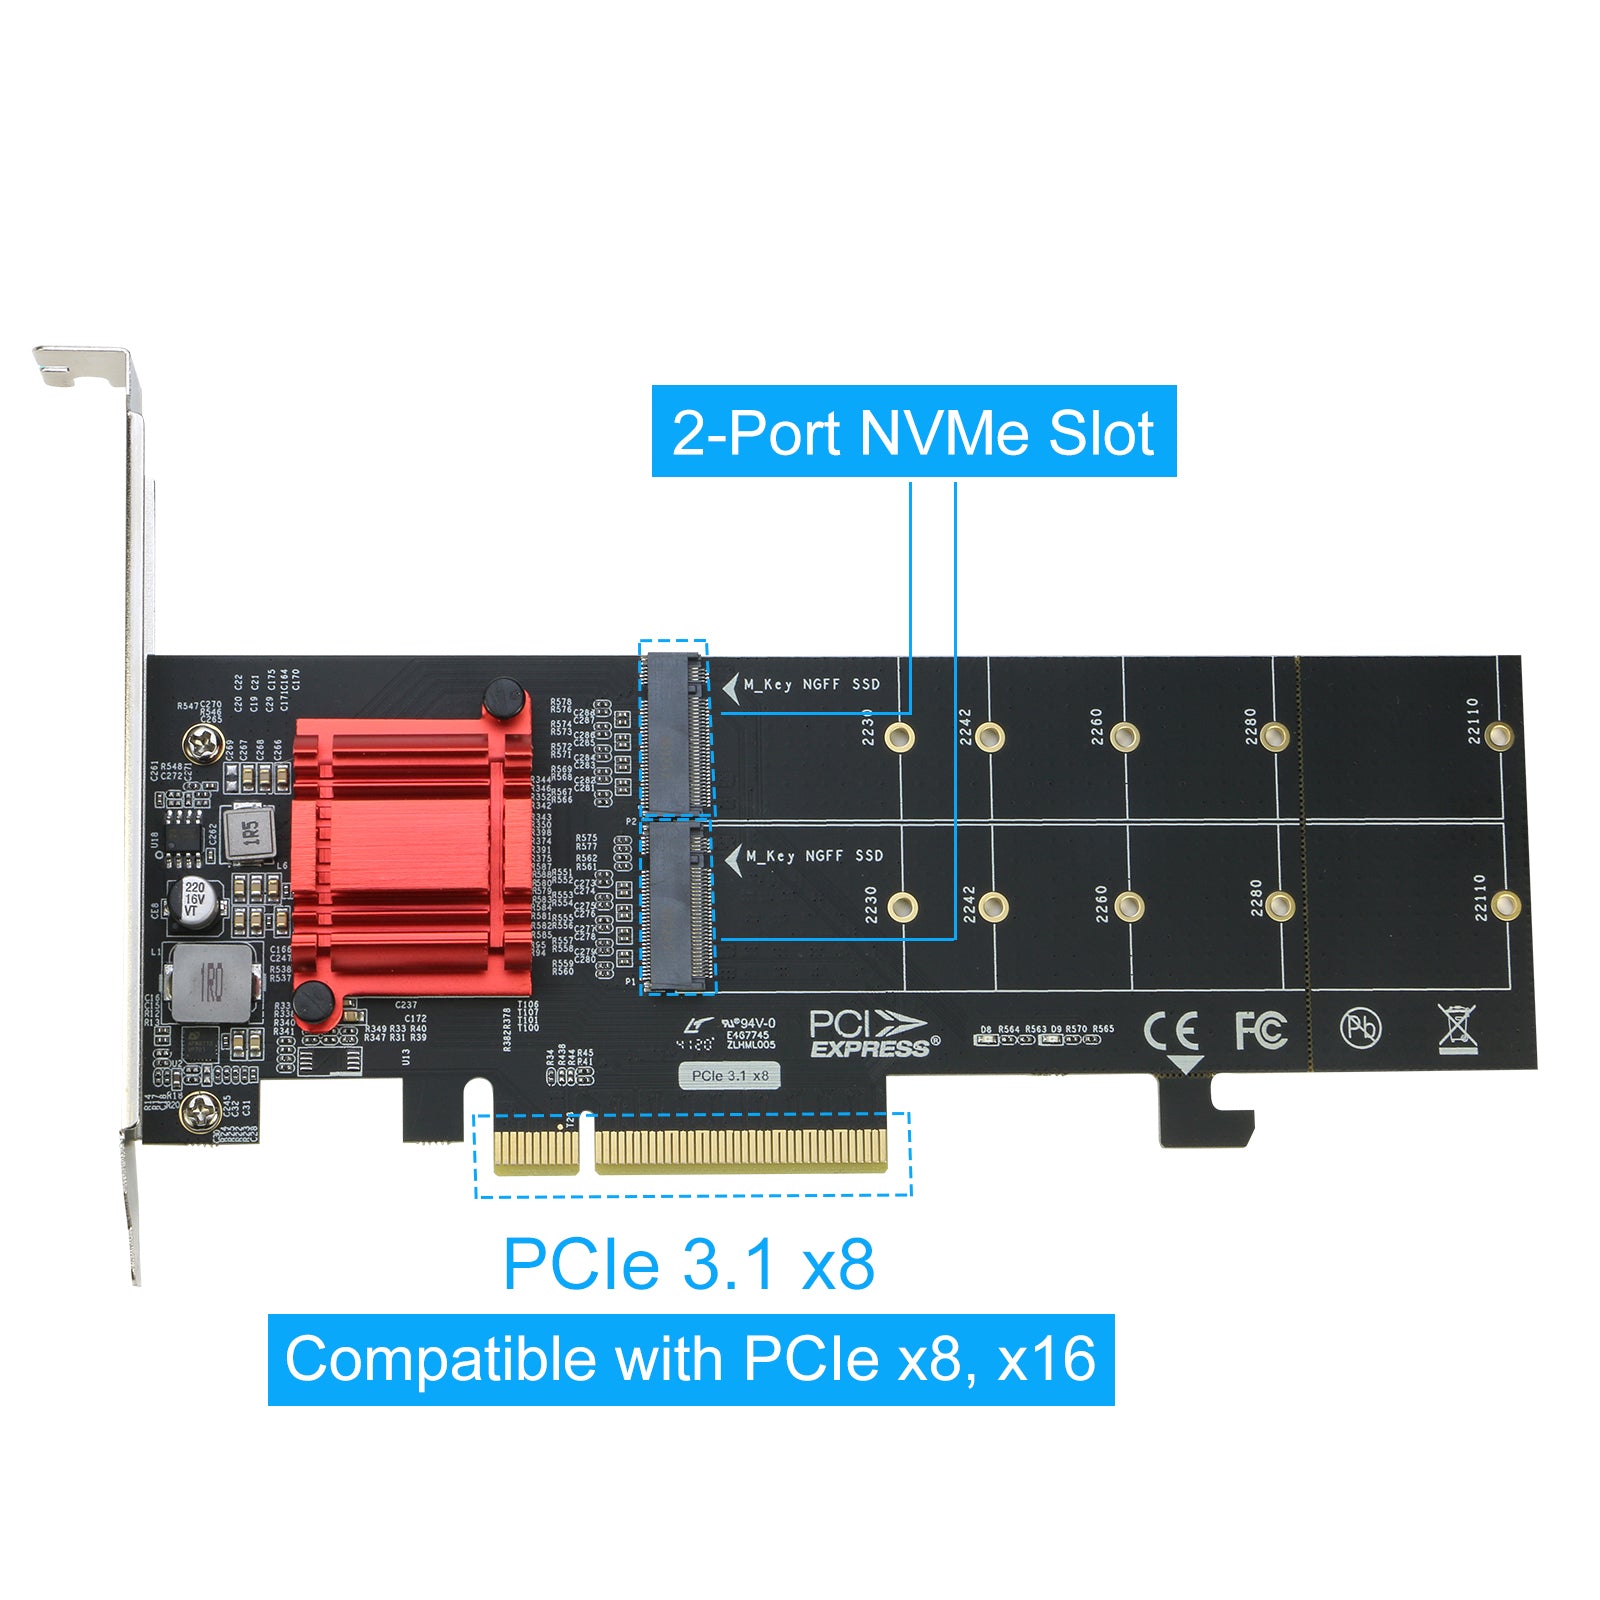 NVMe to PCIe Adapter x16, RIITOP M.2 NVMe SSD to PCI-e 3.0 x16 Adapter